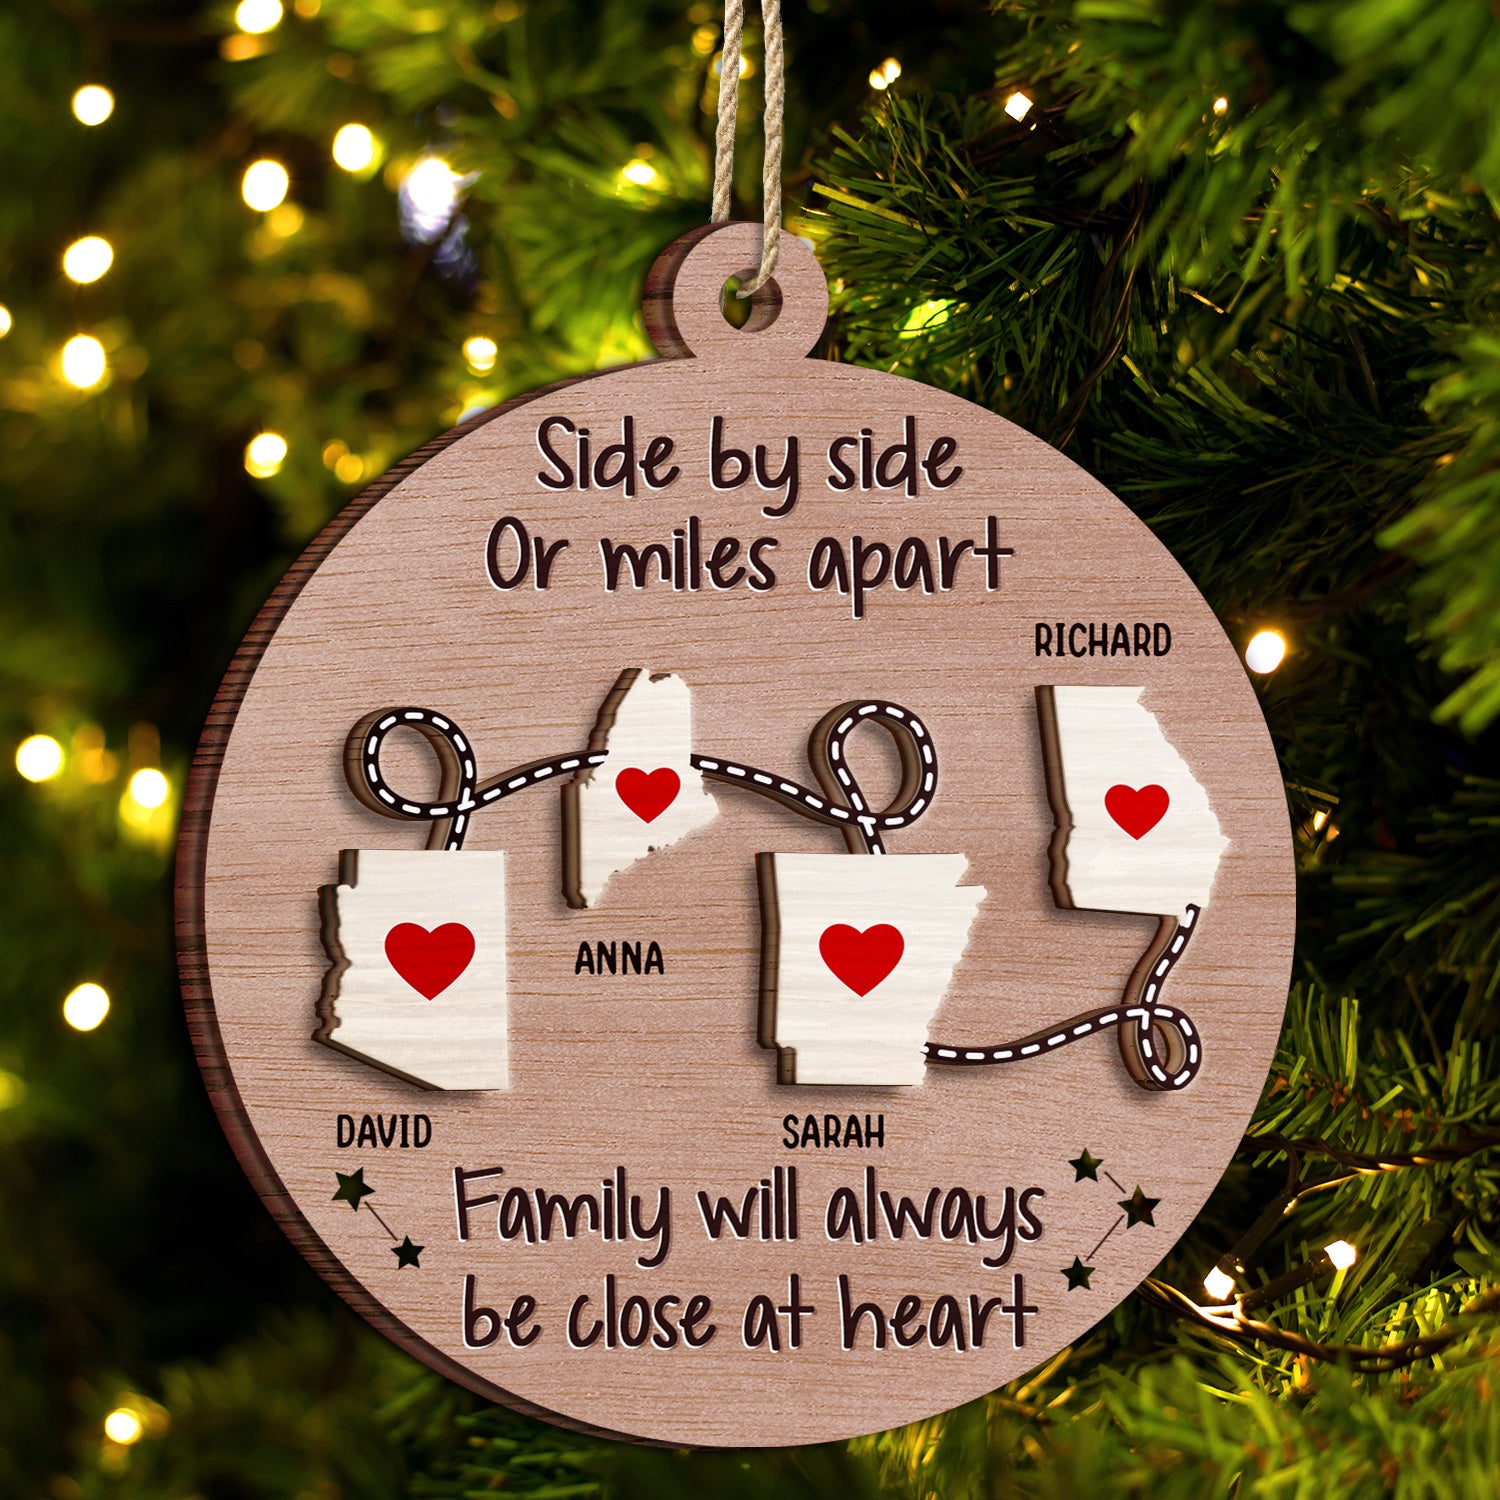 Side By Side Or Miles Apart - Christmas Gift For Family, BFF Best Friends, Siblings, Brothers, Sisters - Personalized 2-Layered Wooden Ornament